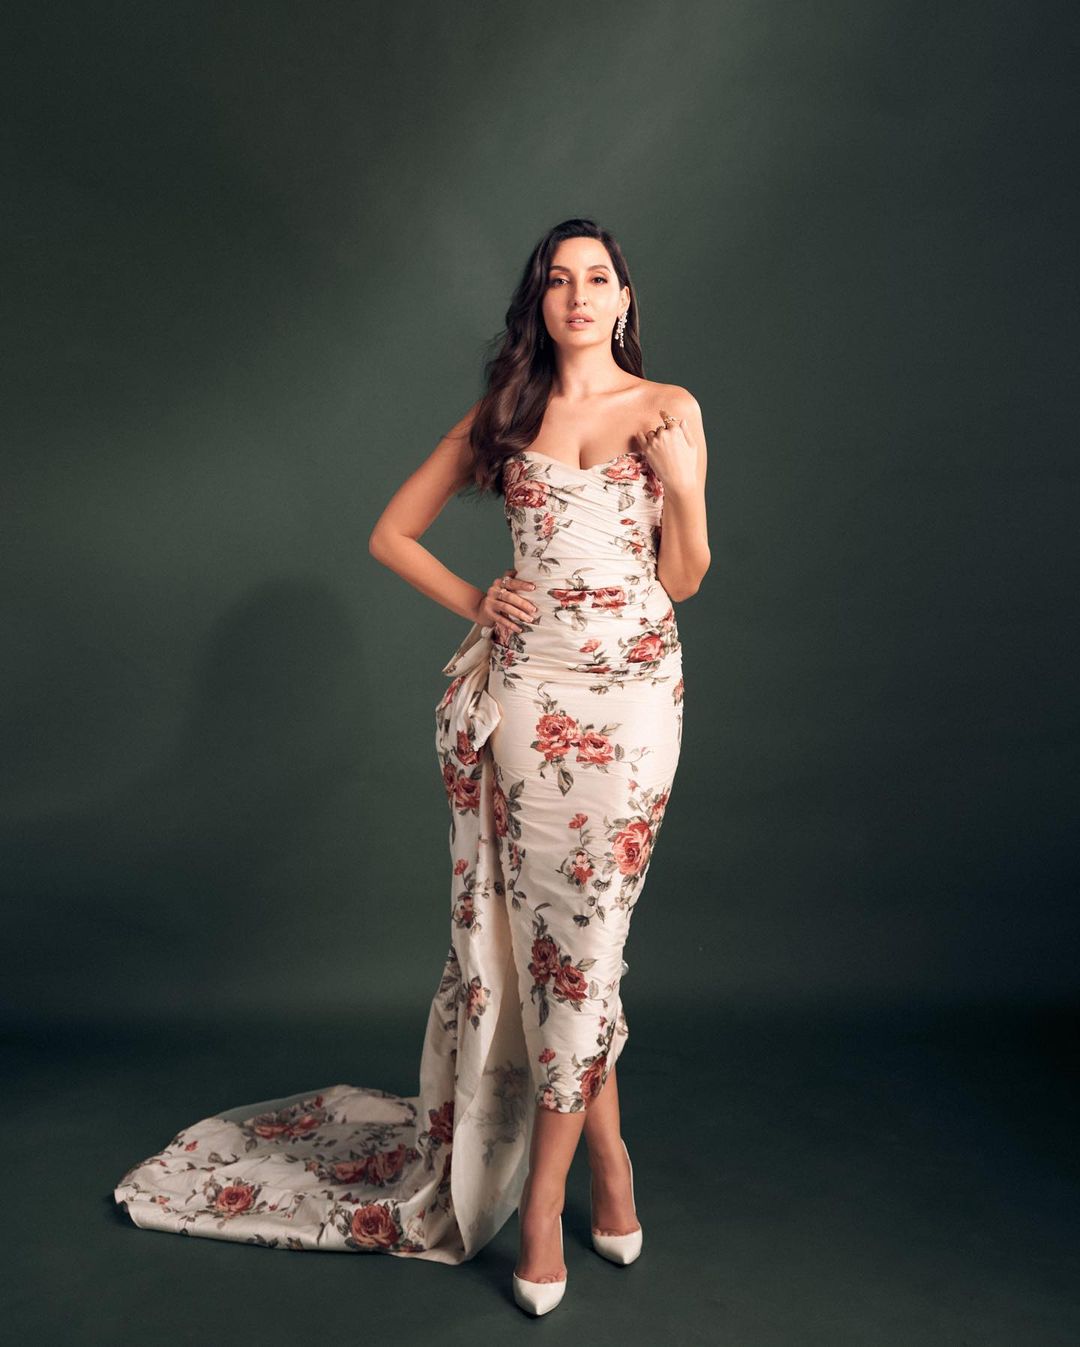 Nora Fatehi paints an elegant picture in the floral dress.